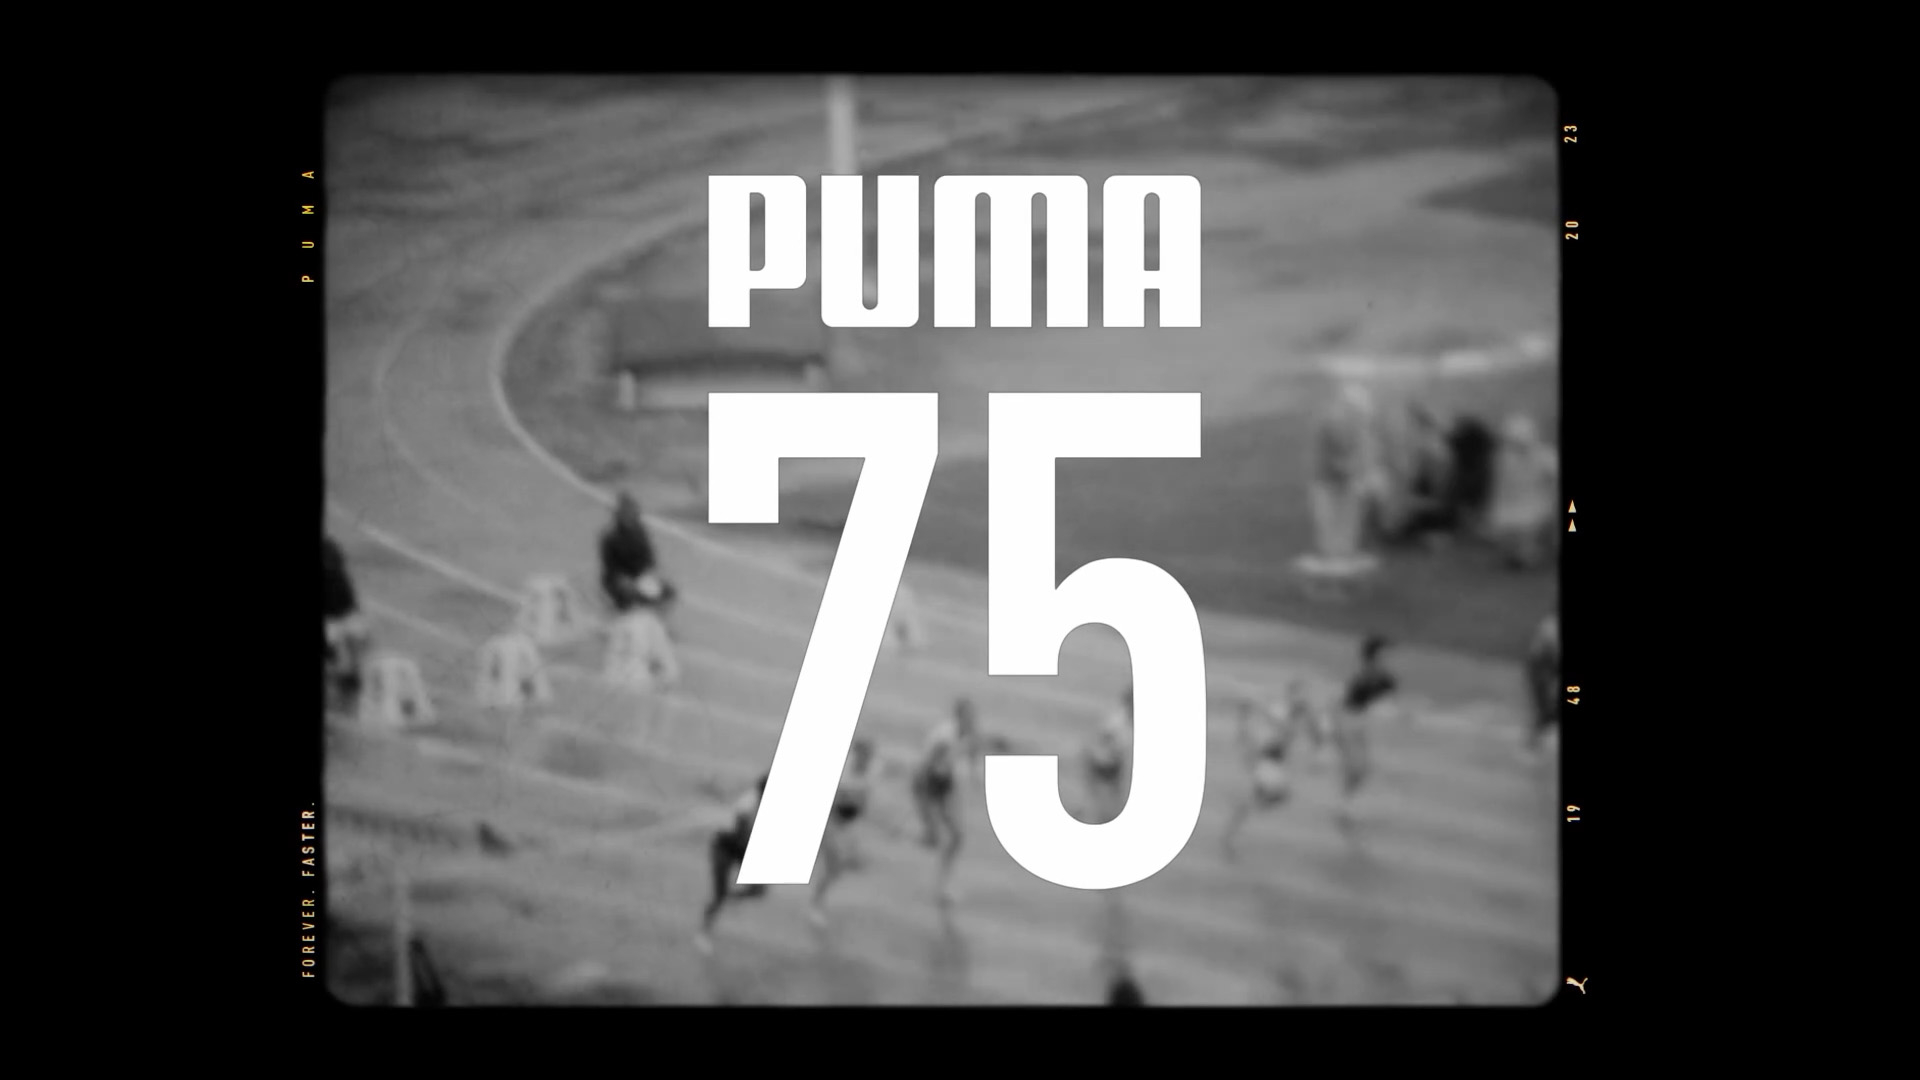 PUMA Celebrates 75 Years History in Sports, Culture and Innovation | Business Wire